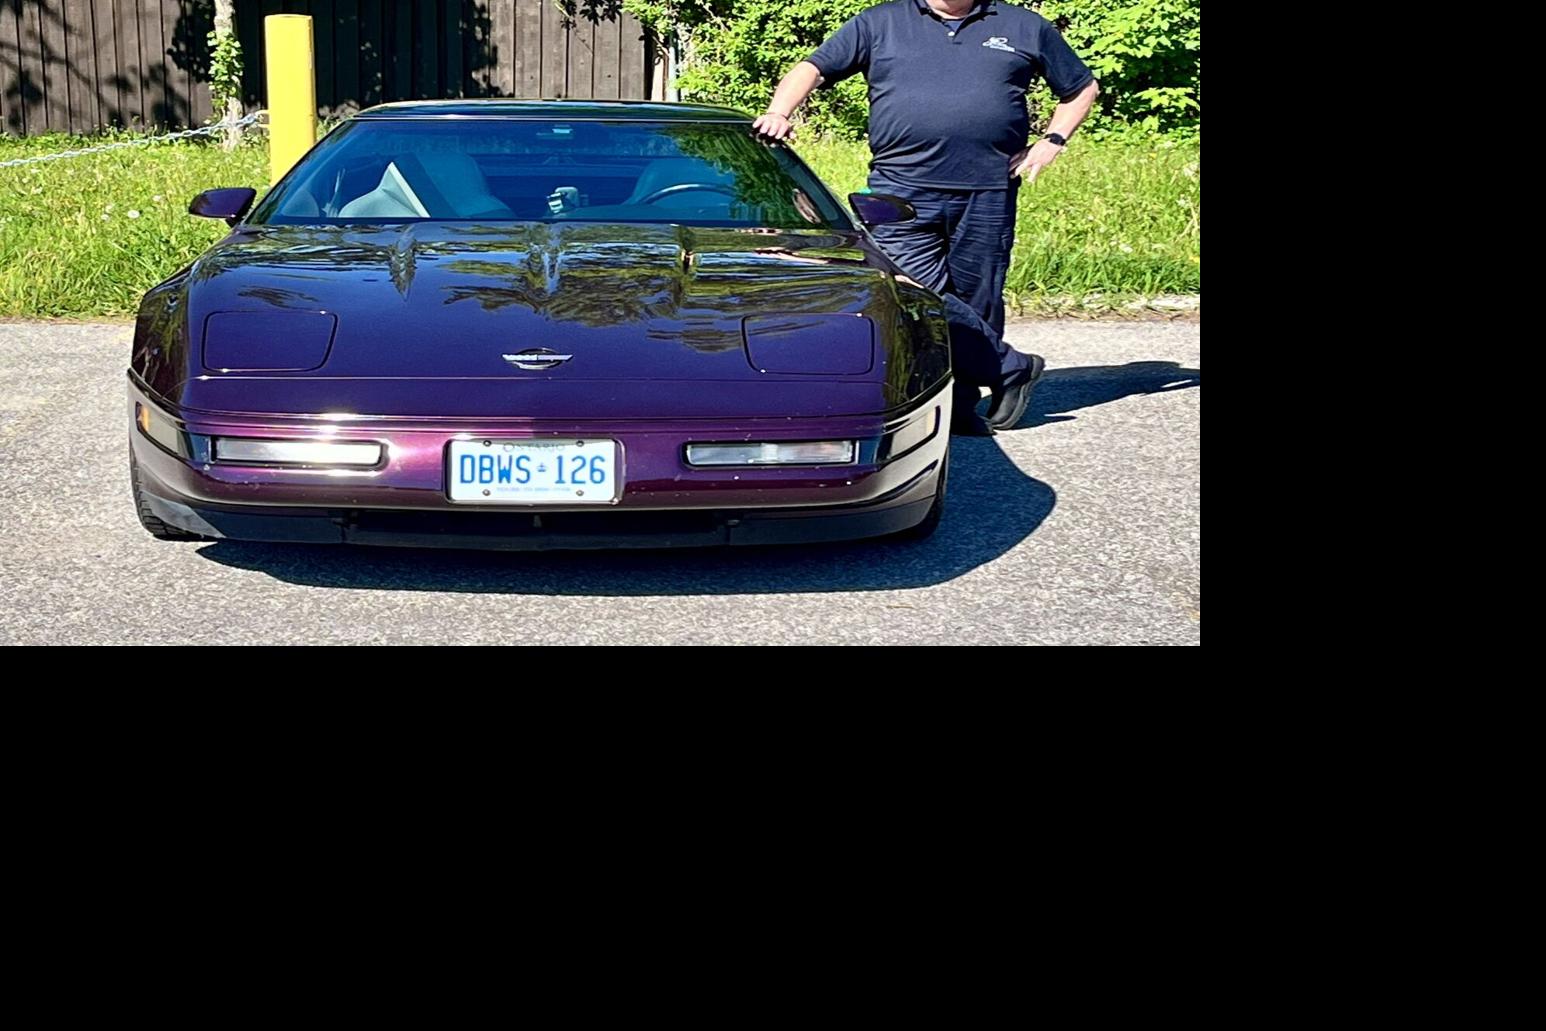 'My cousin drove a splashy, purple Corvette, and I joked that he should remember me in his will. I never expected he would'